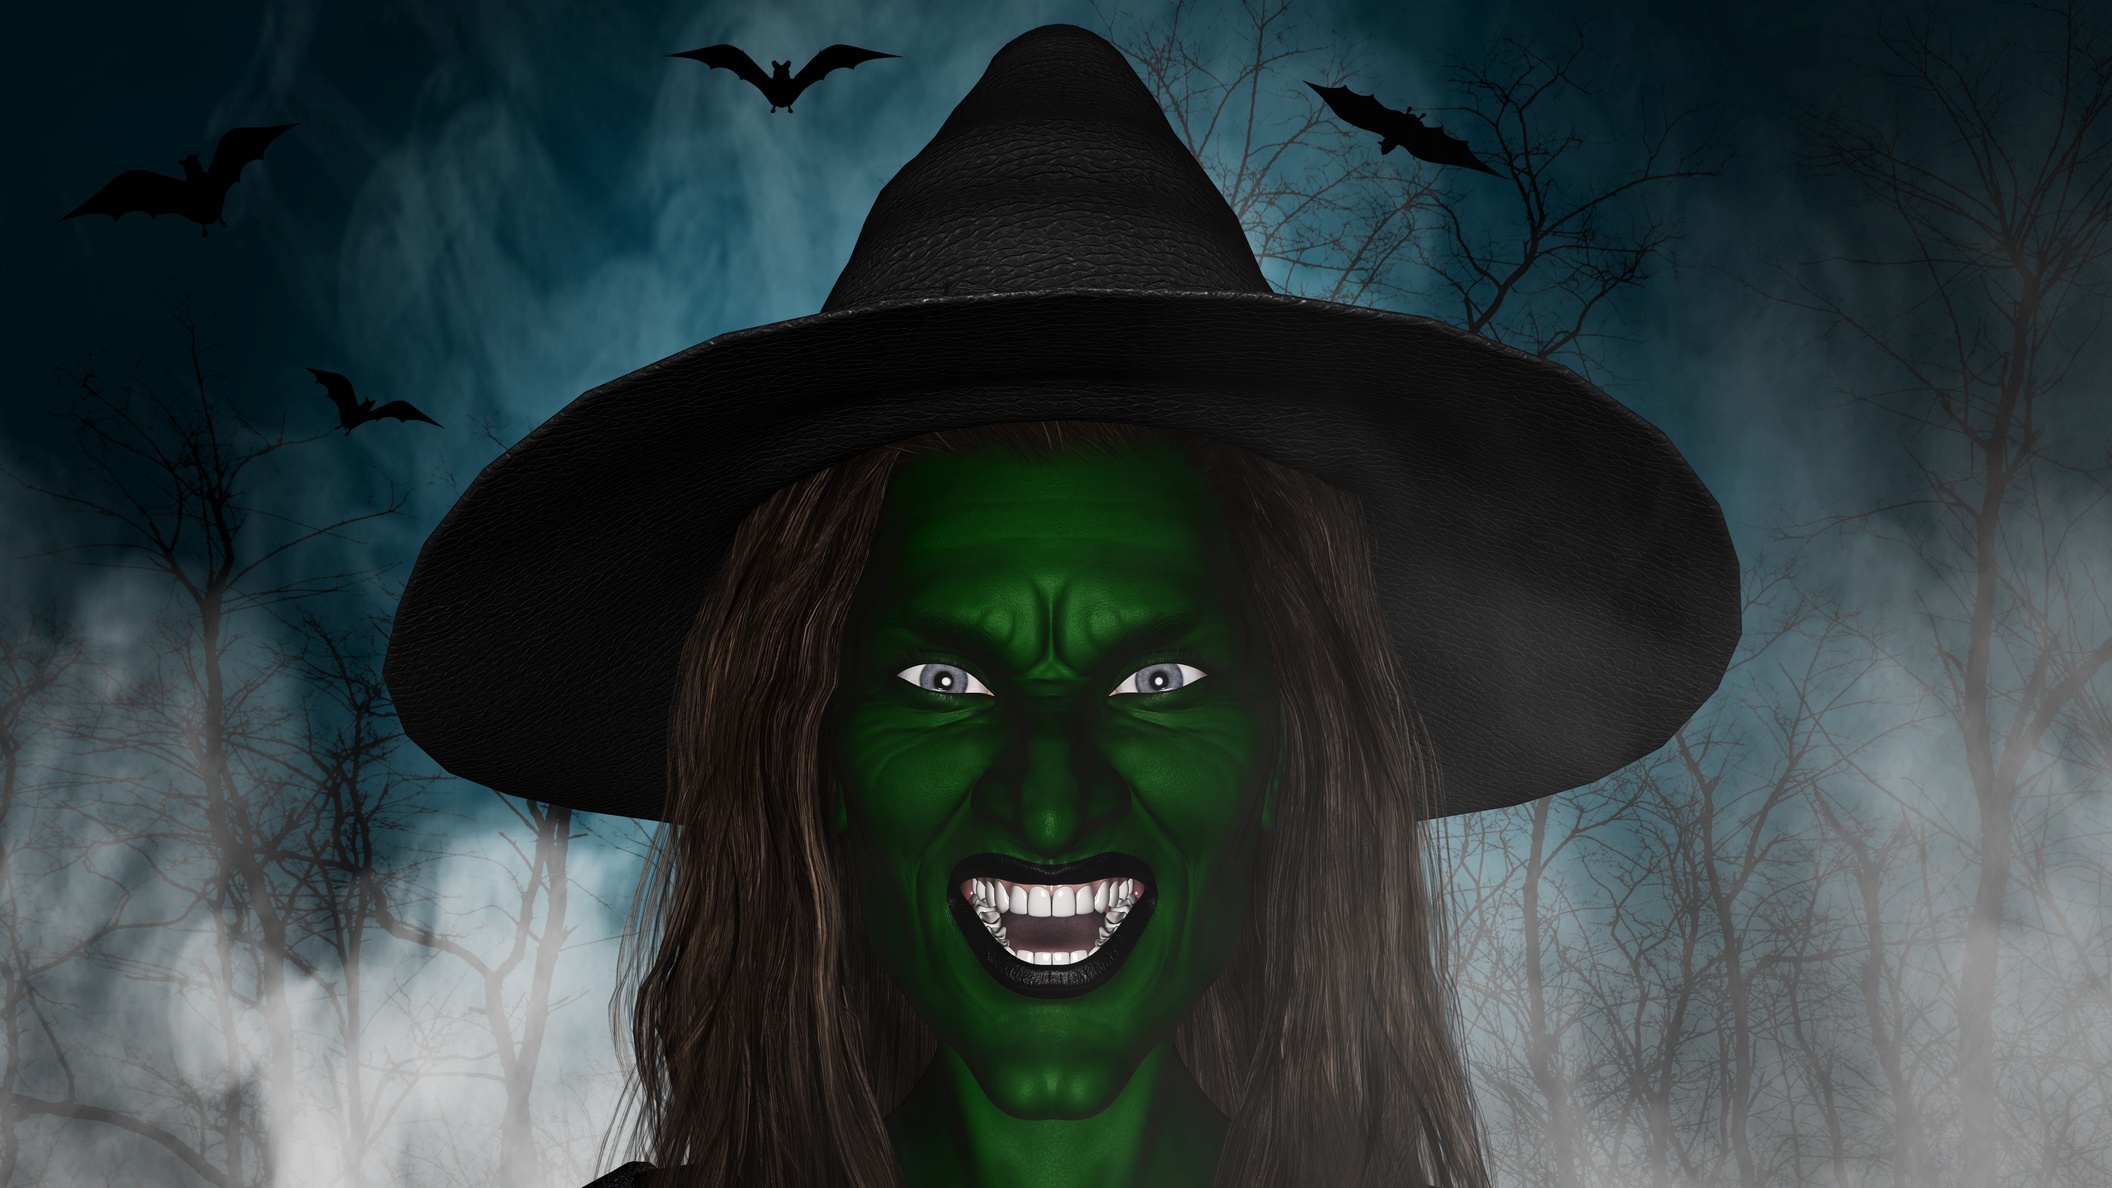 Generic photo of woman in witch costume (Thinkstock/PA)